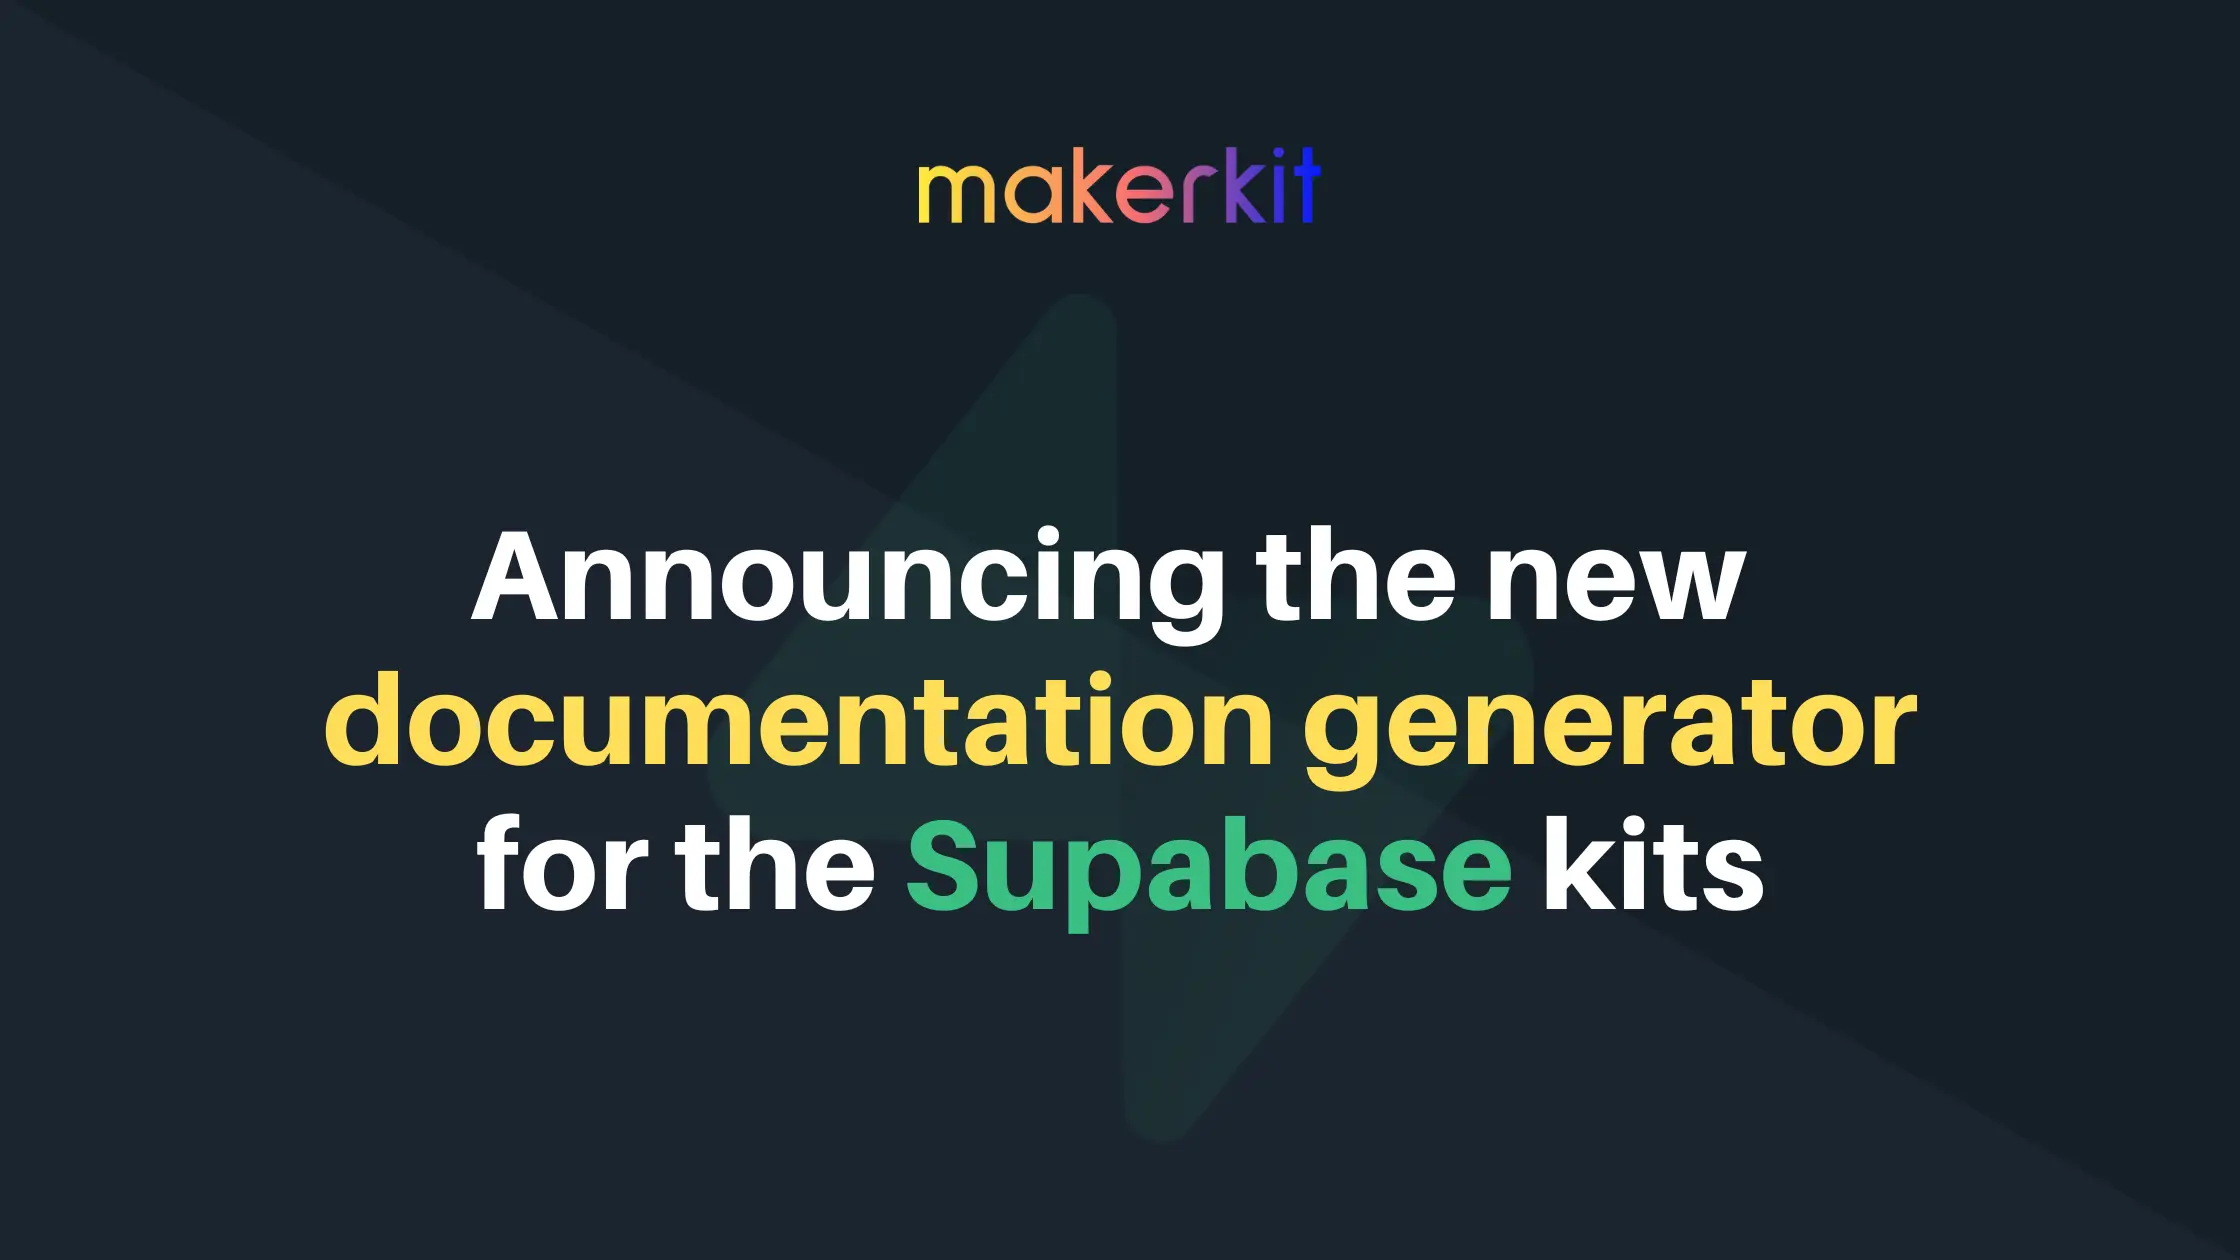 Cover Image for Announcing a new documentation generator for the Supabase Kits